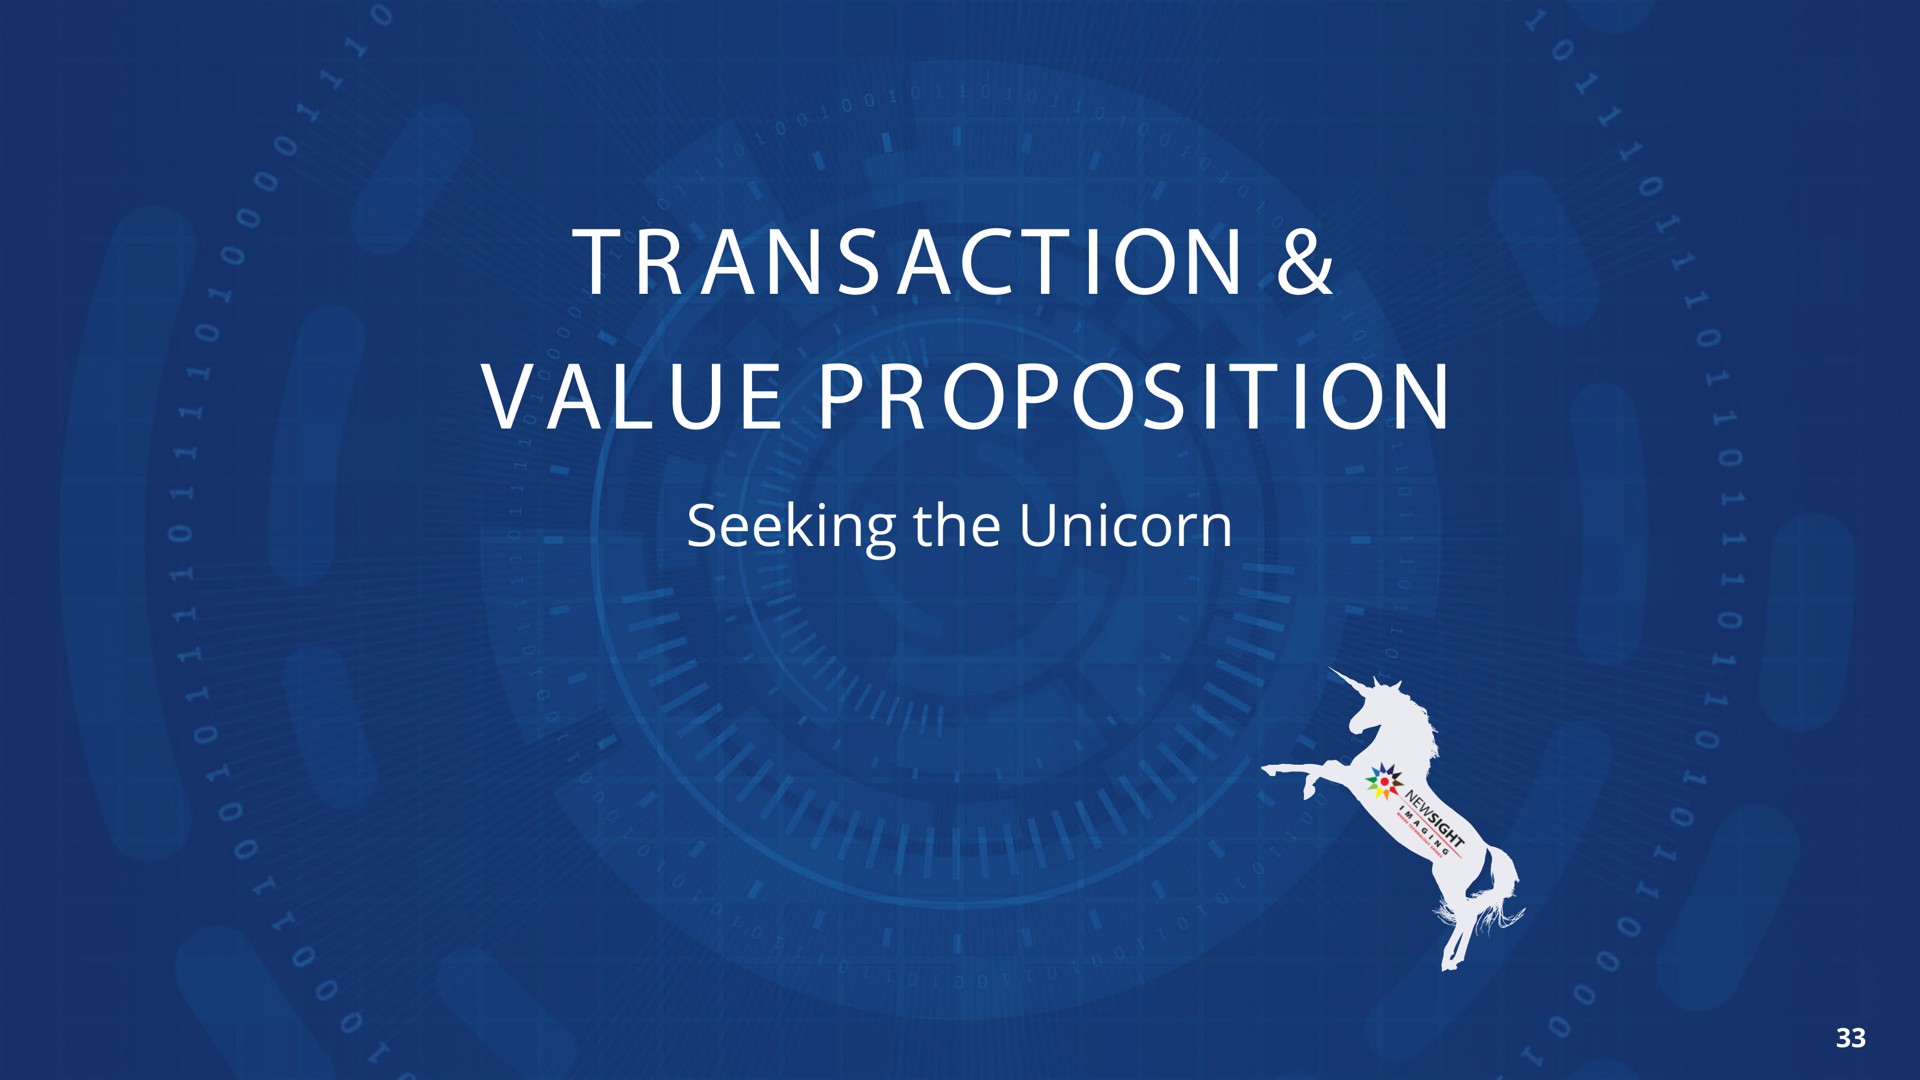 ans act ion it ion seeking the unicorn transaction value proposition | Newsight Imaging